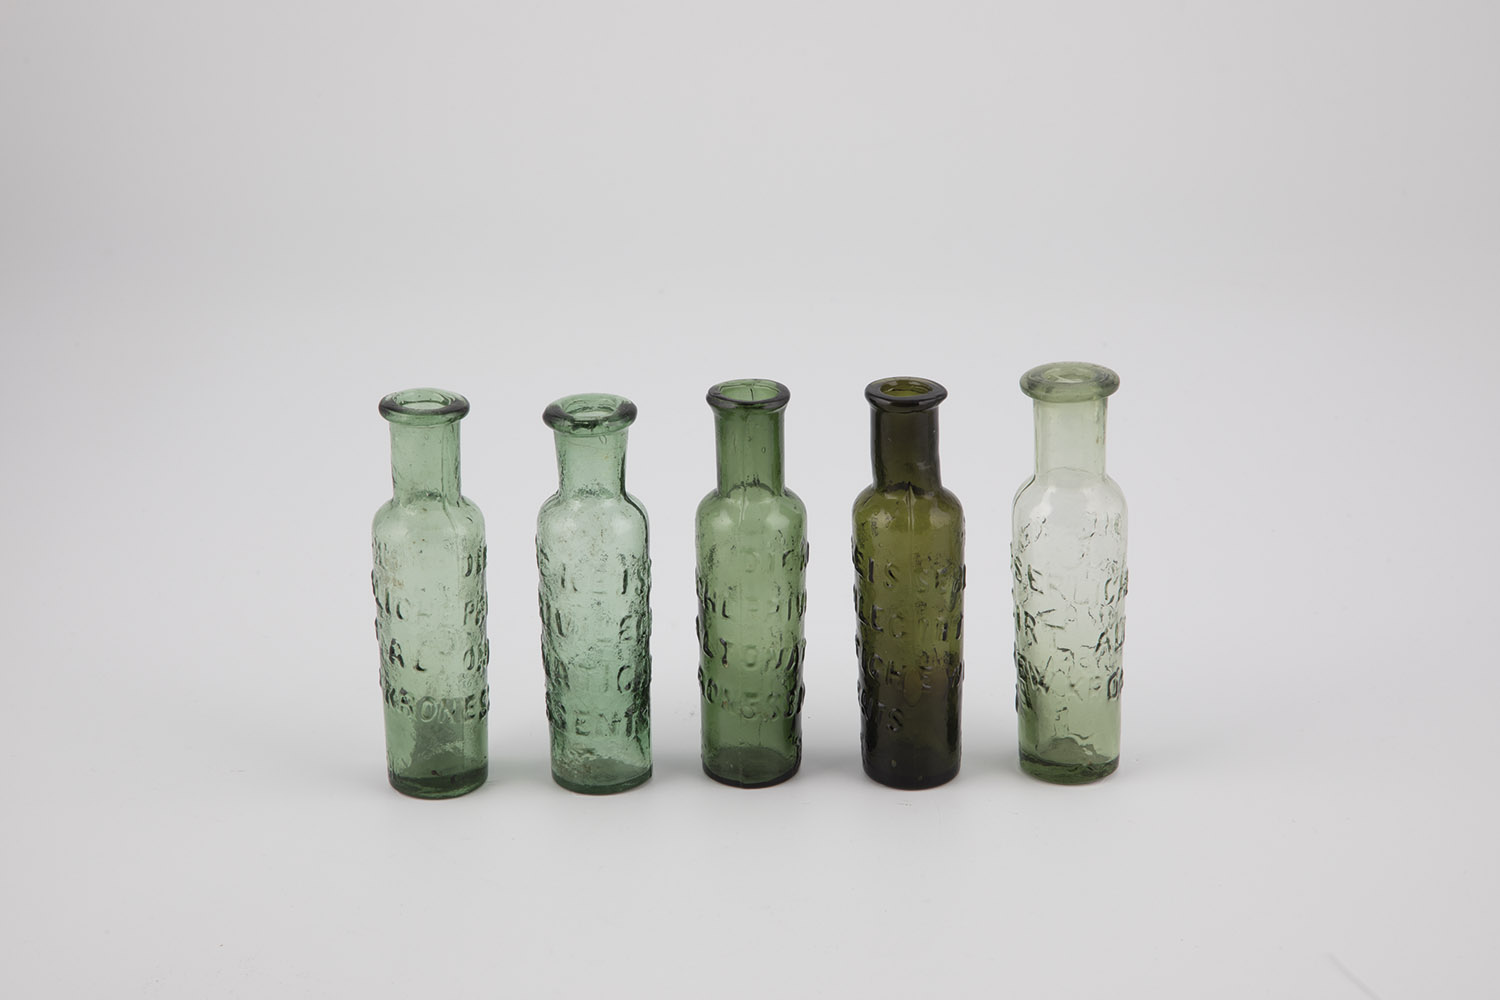 Five glass vials for Altona miracle cure Germany, 19th century Green or olive-coloured glass.